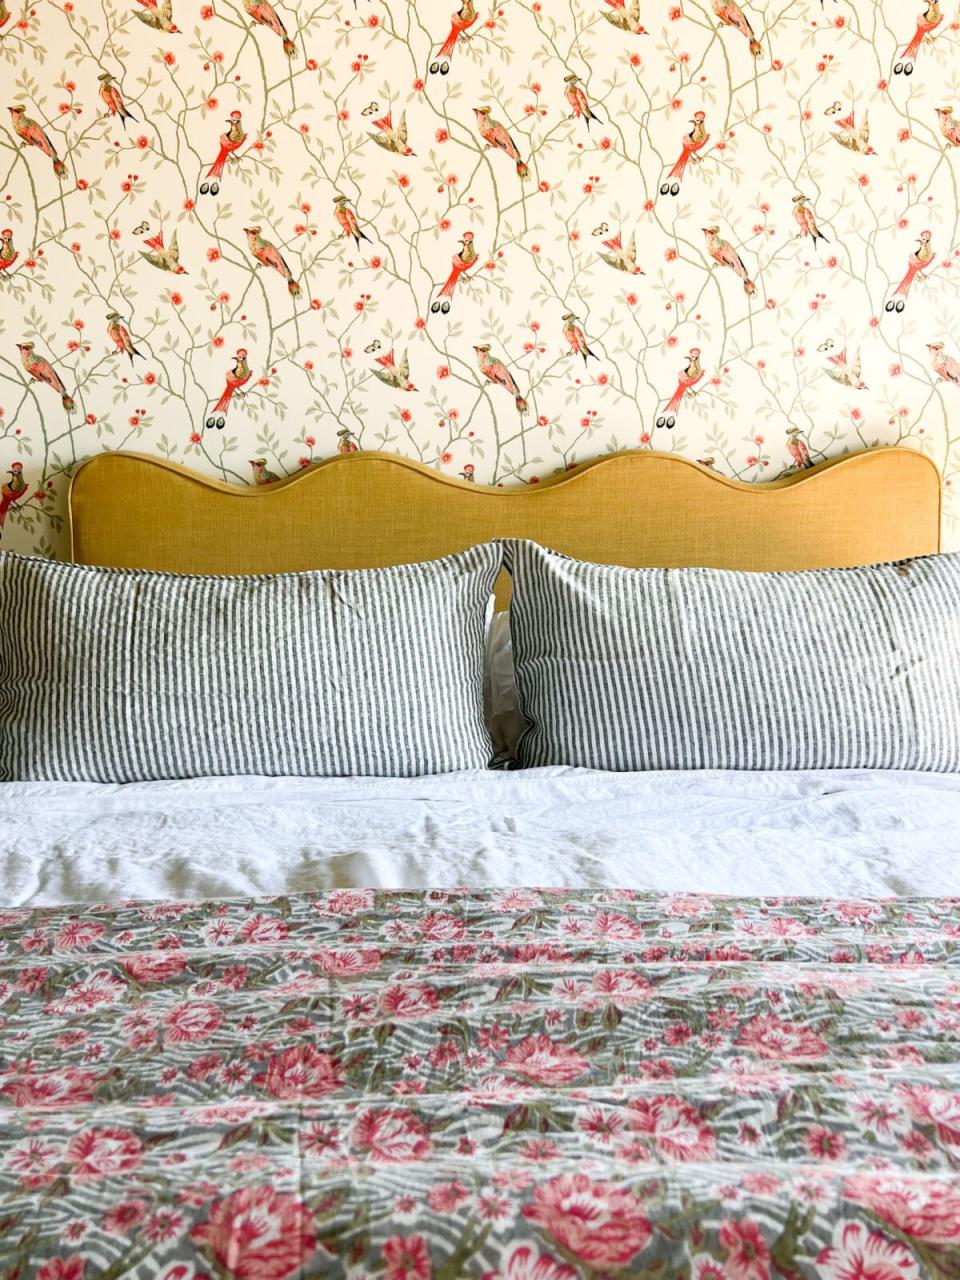 A Simple, Practical Guide to Buying Bed Sheets Based on How You Sleep